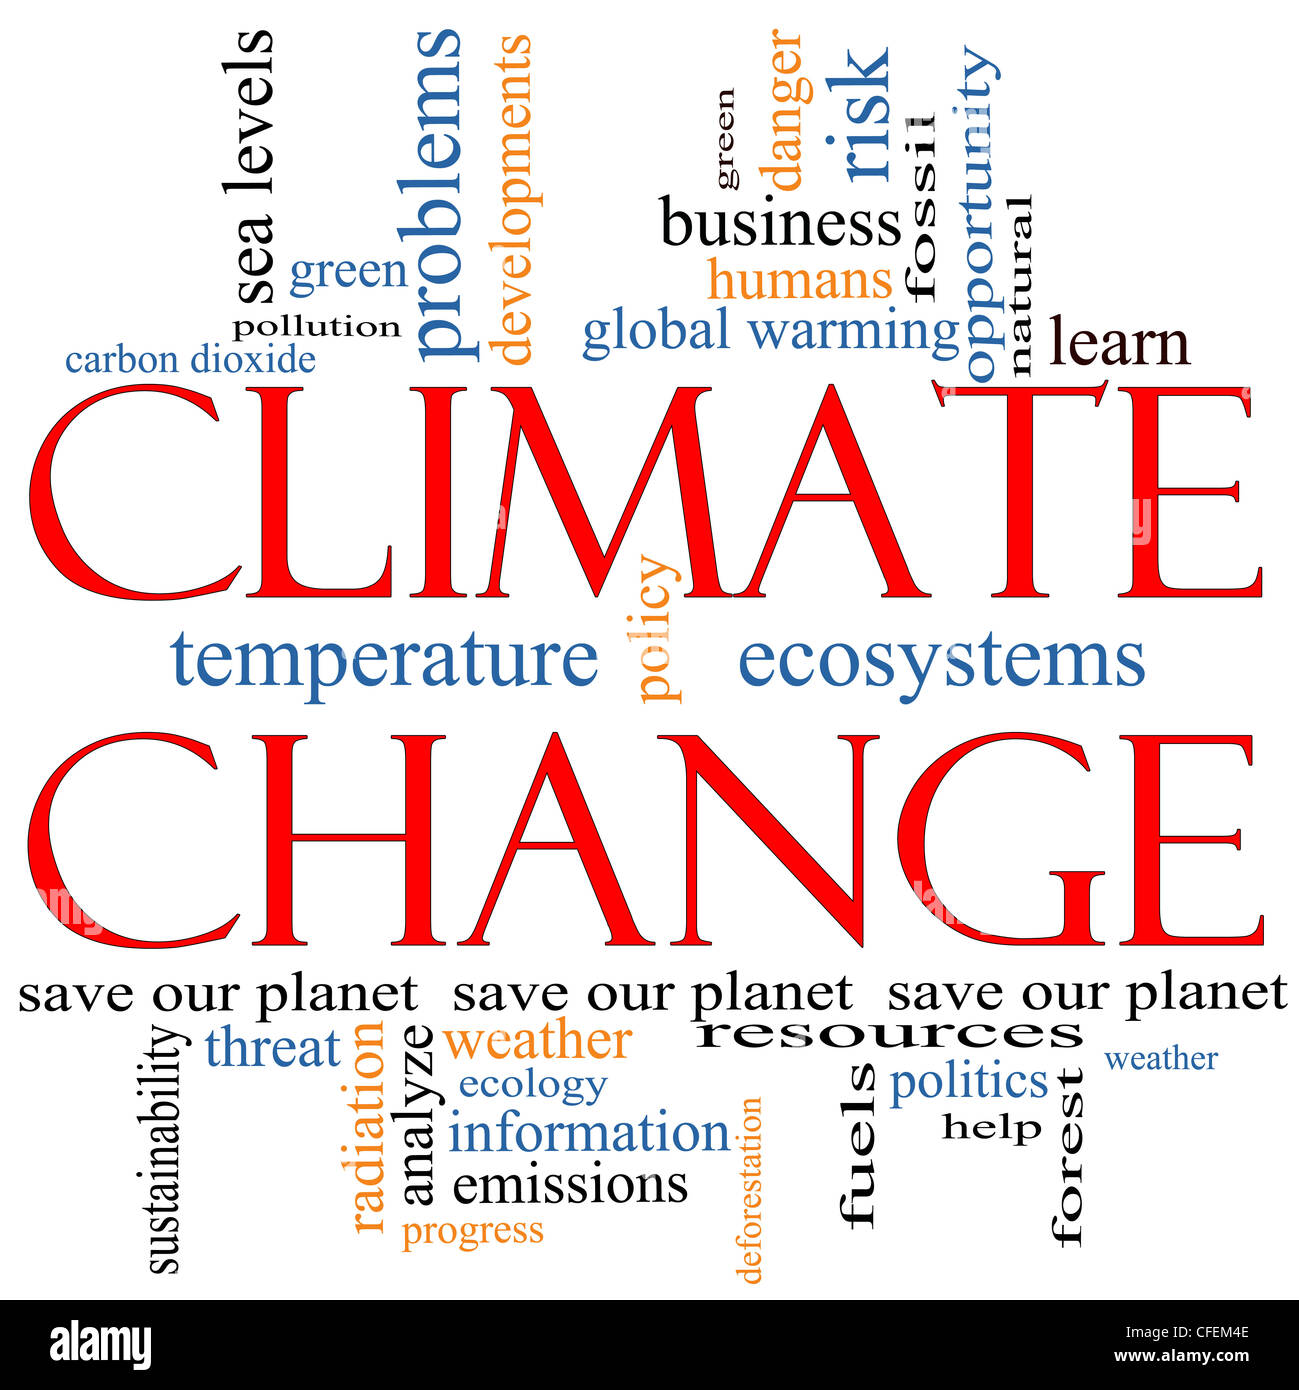 A Climate Change word cloud concept with terms such as save, planet, global, warming, green, pollution and more. Stock Photo